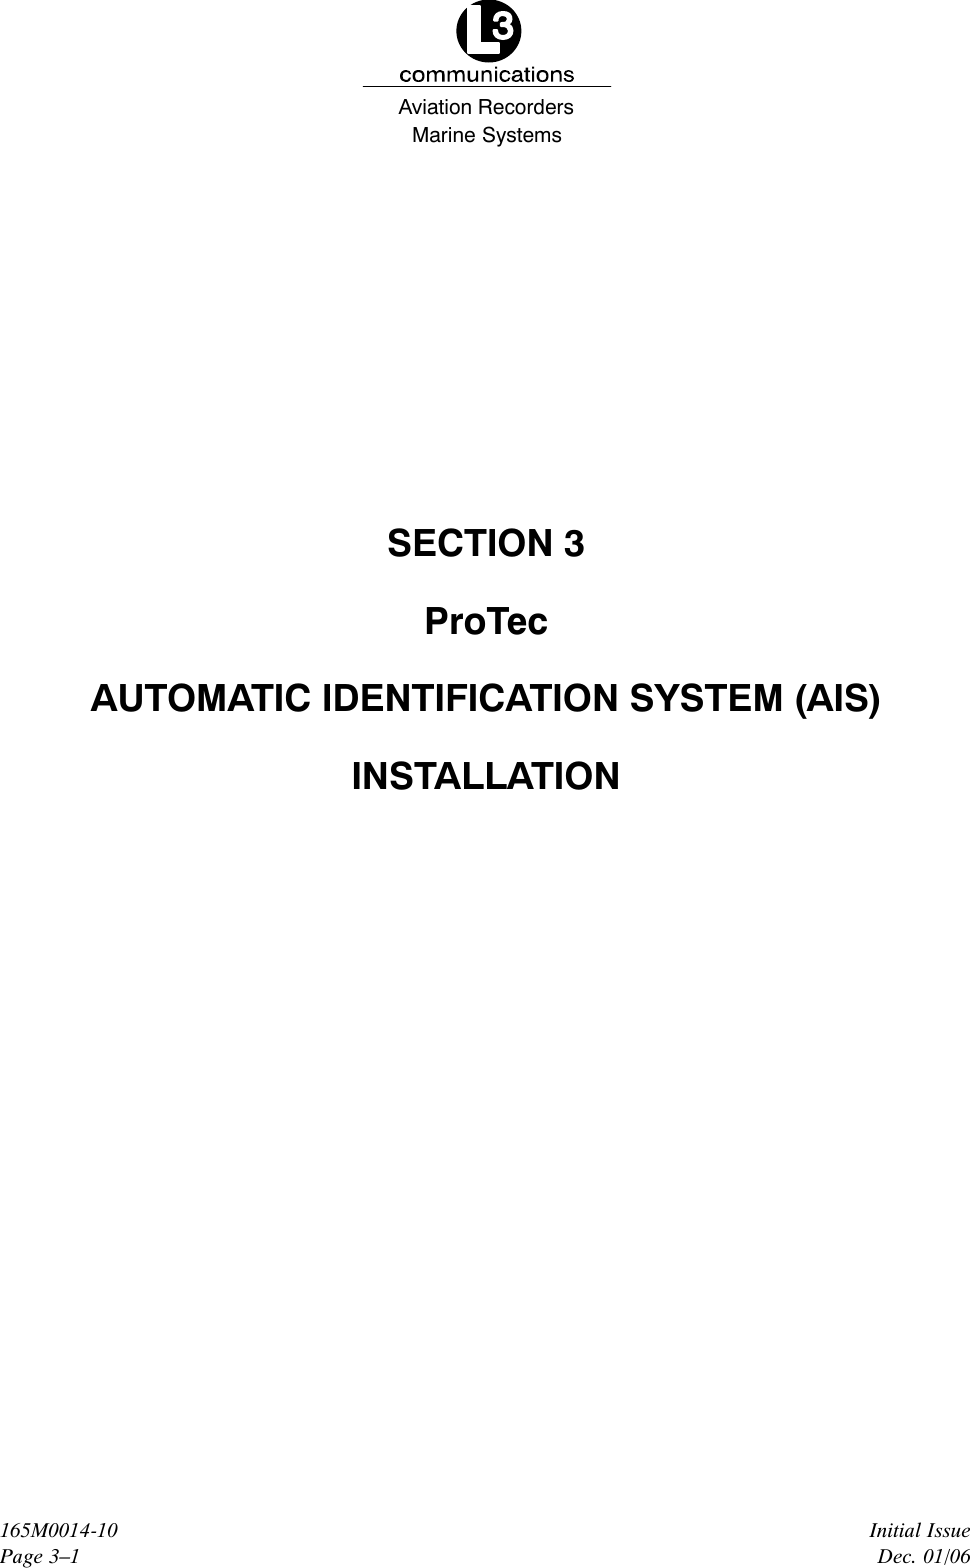 Marine SystemsAviation RecordersInitial IssueDec. 01/06165M0014-10Page 3–1SECTION 3ProTecAUTOMATIC IDENTIFICATION SYSTEM (AIS)INSTALLATION